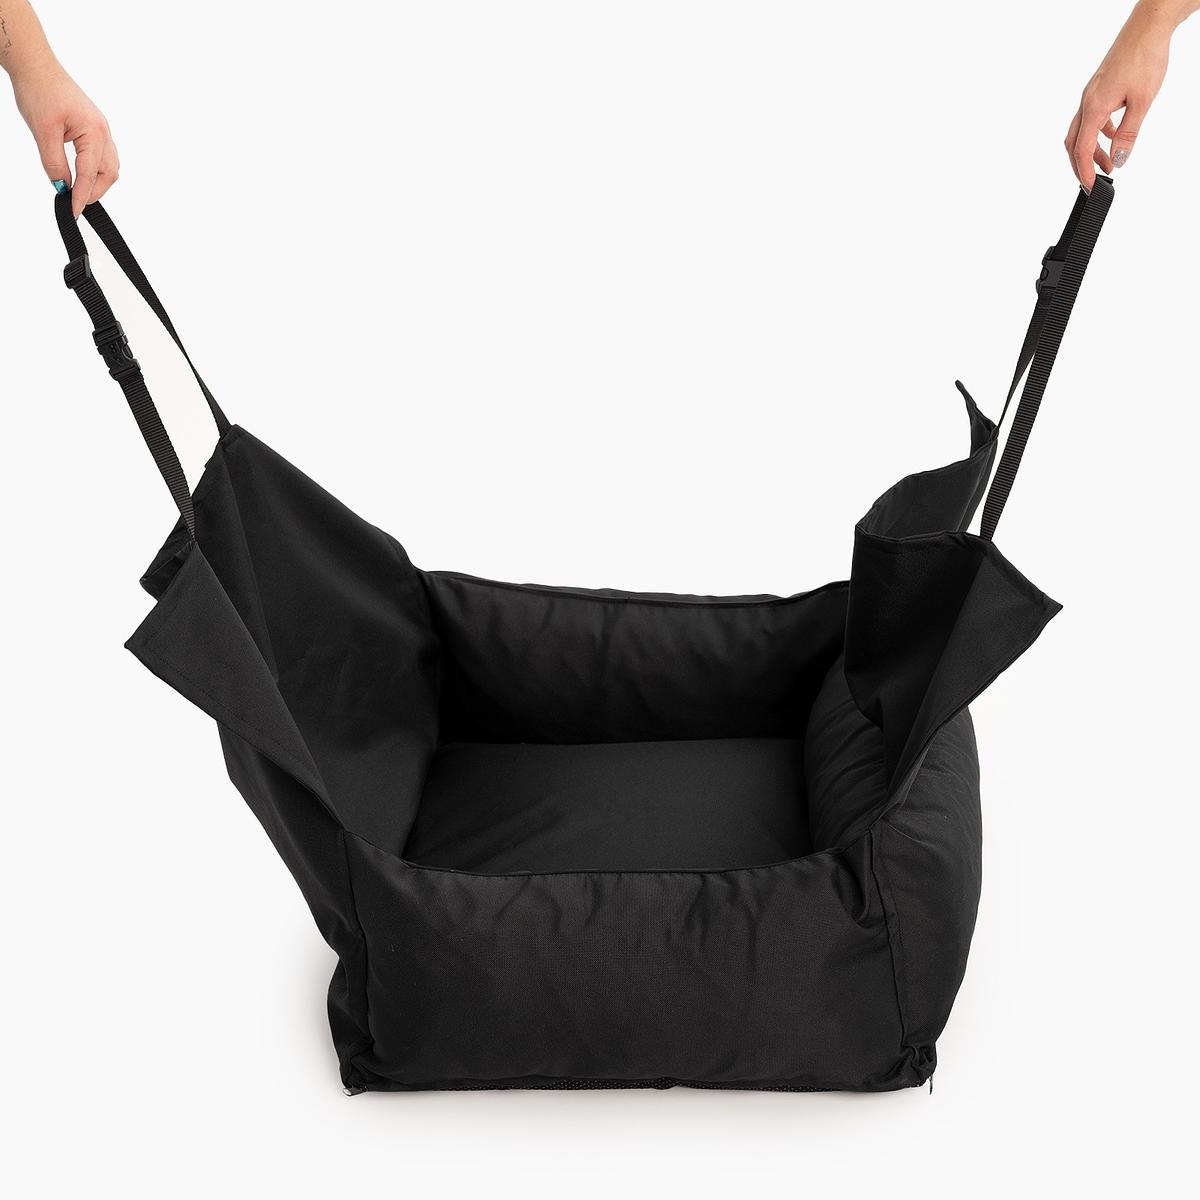 Car seat "Black is the new black"